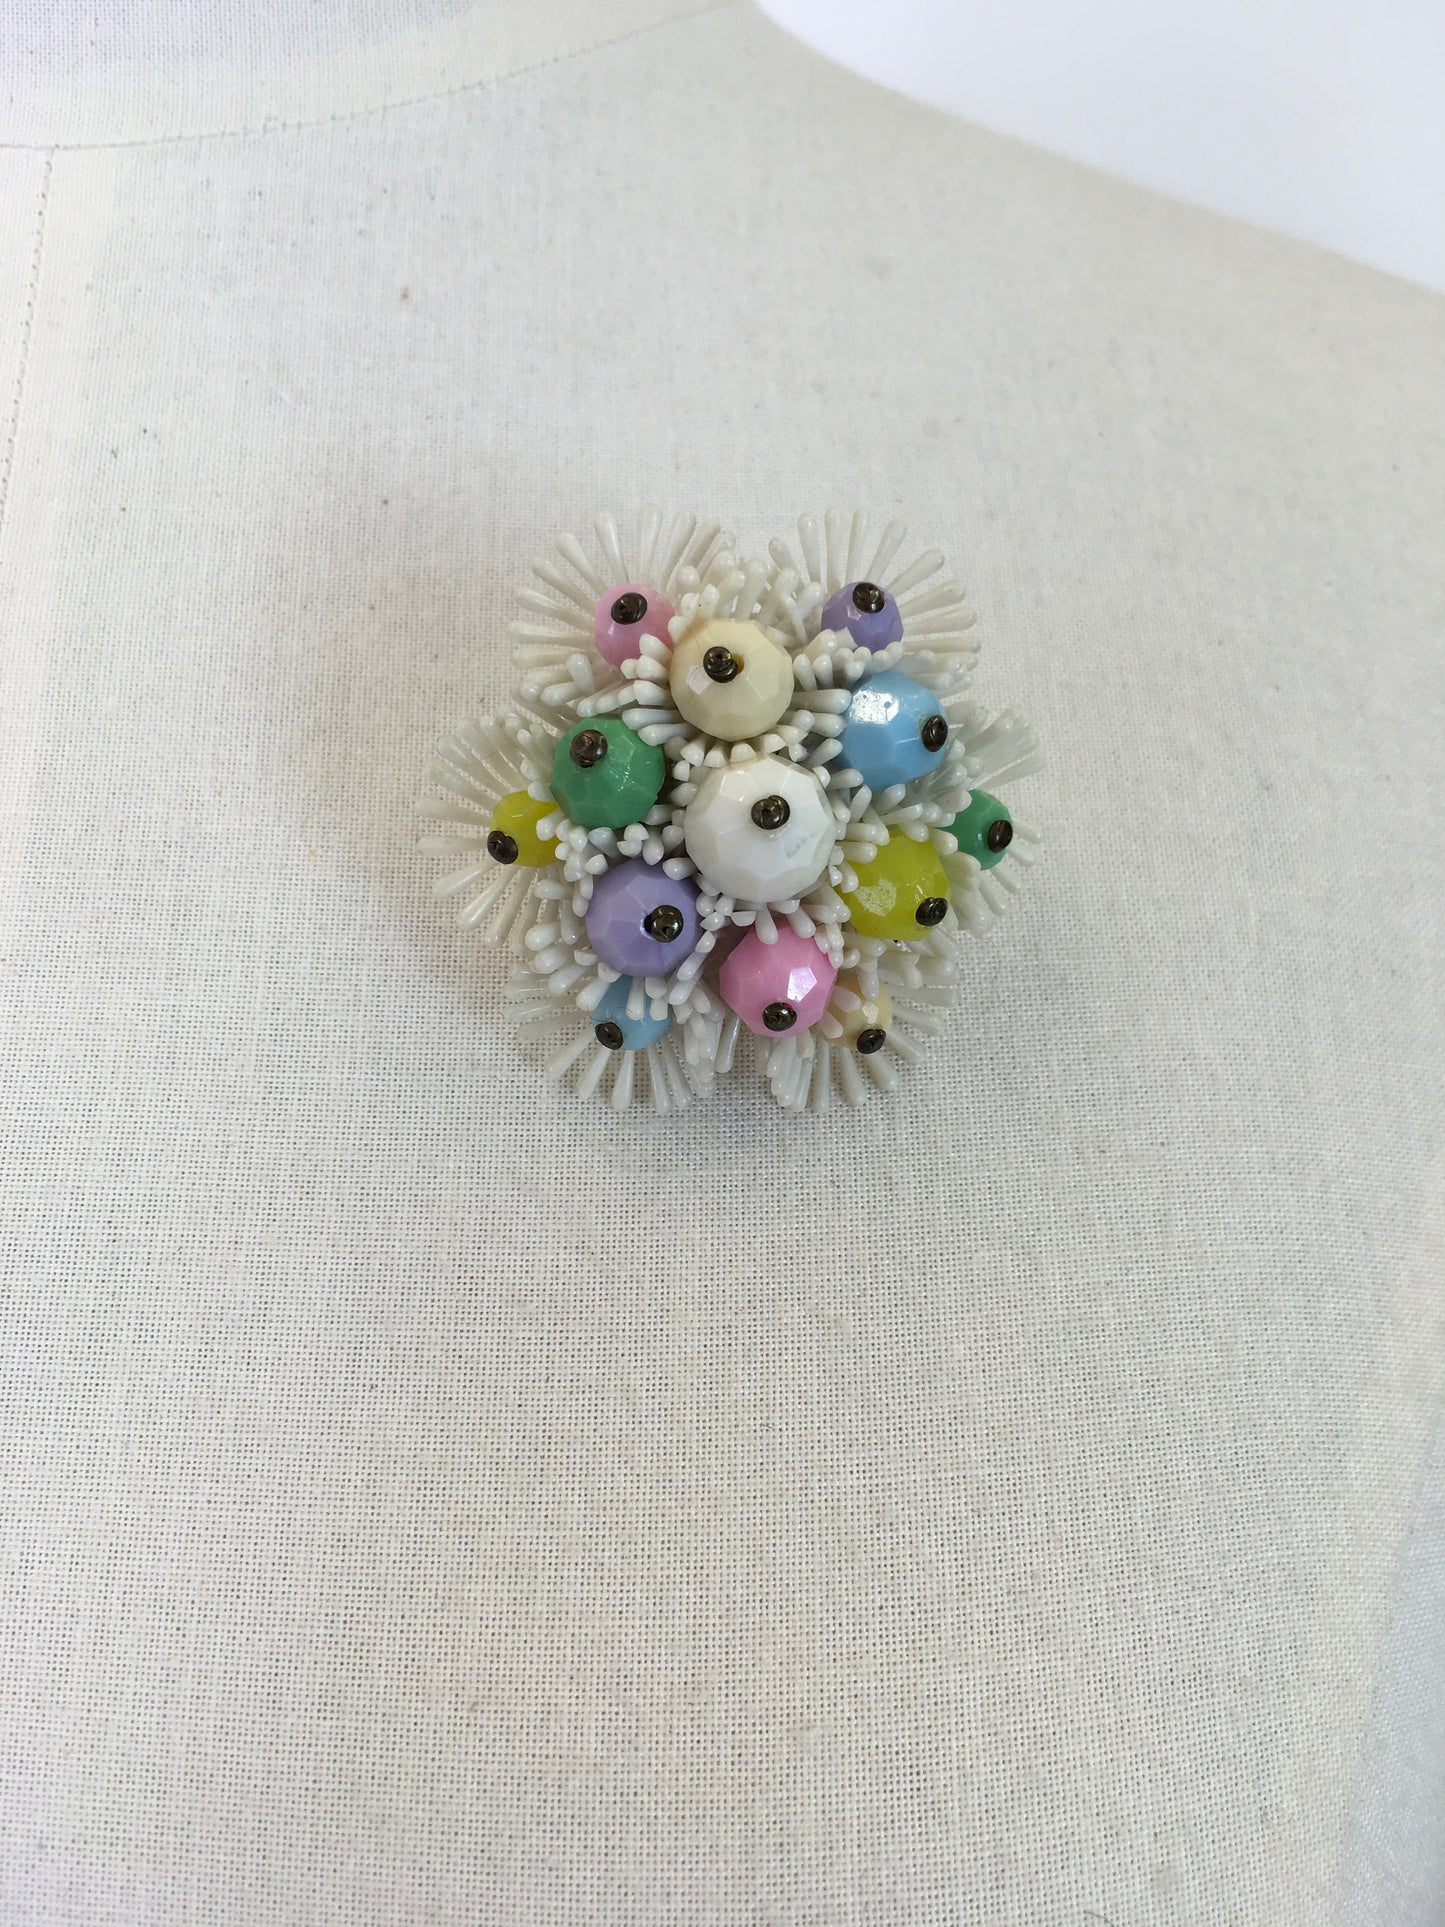 Original 1950’s Plastic and Beaded Brooch - In Pastel Pops of Pink, Green, Purple, Blue and White